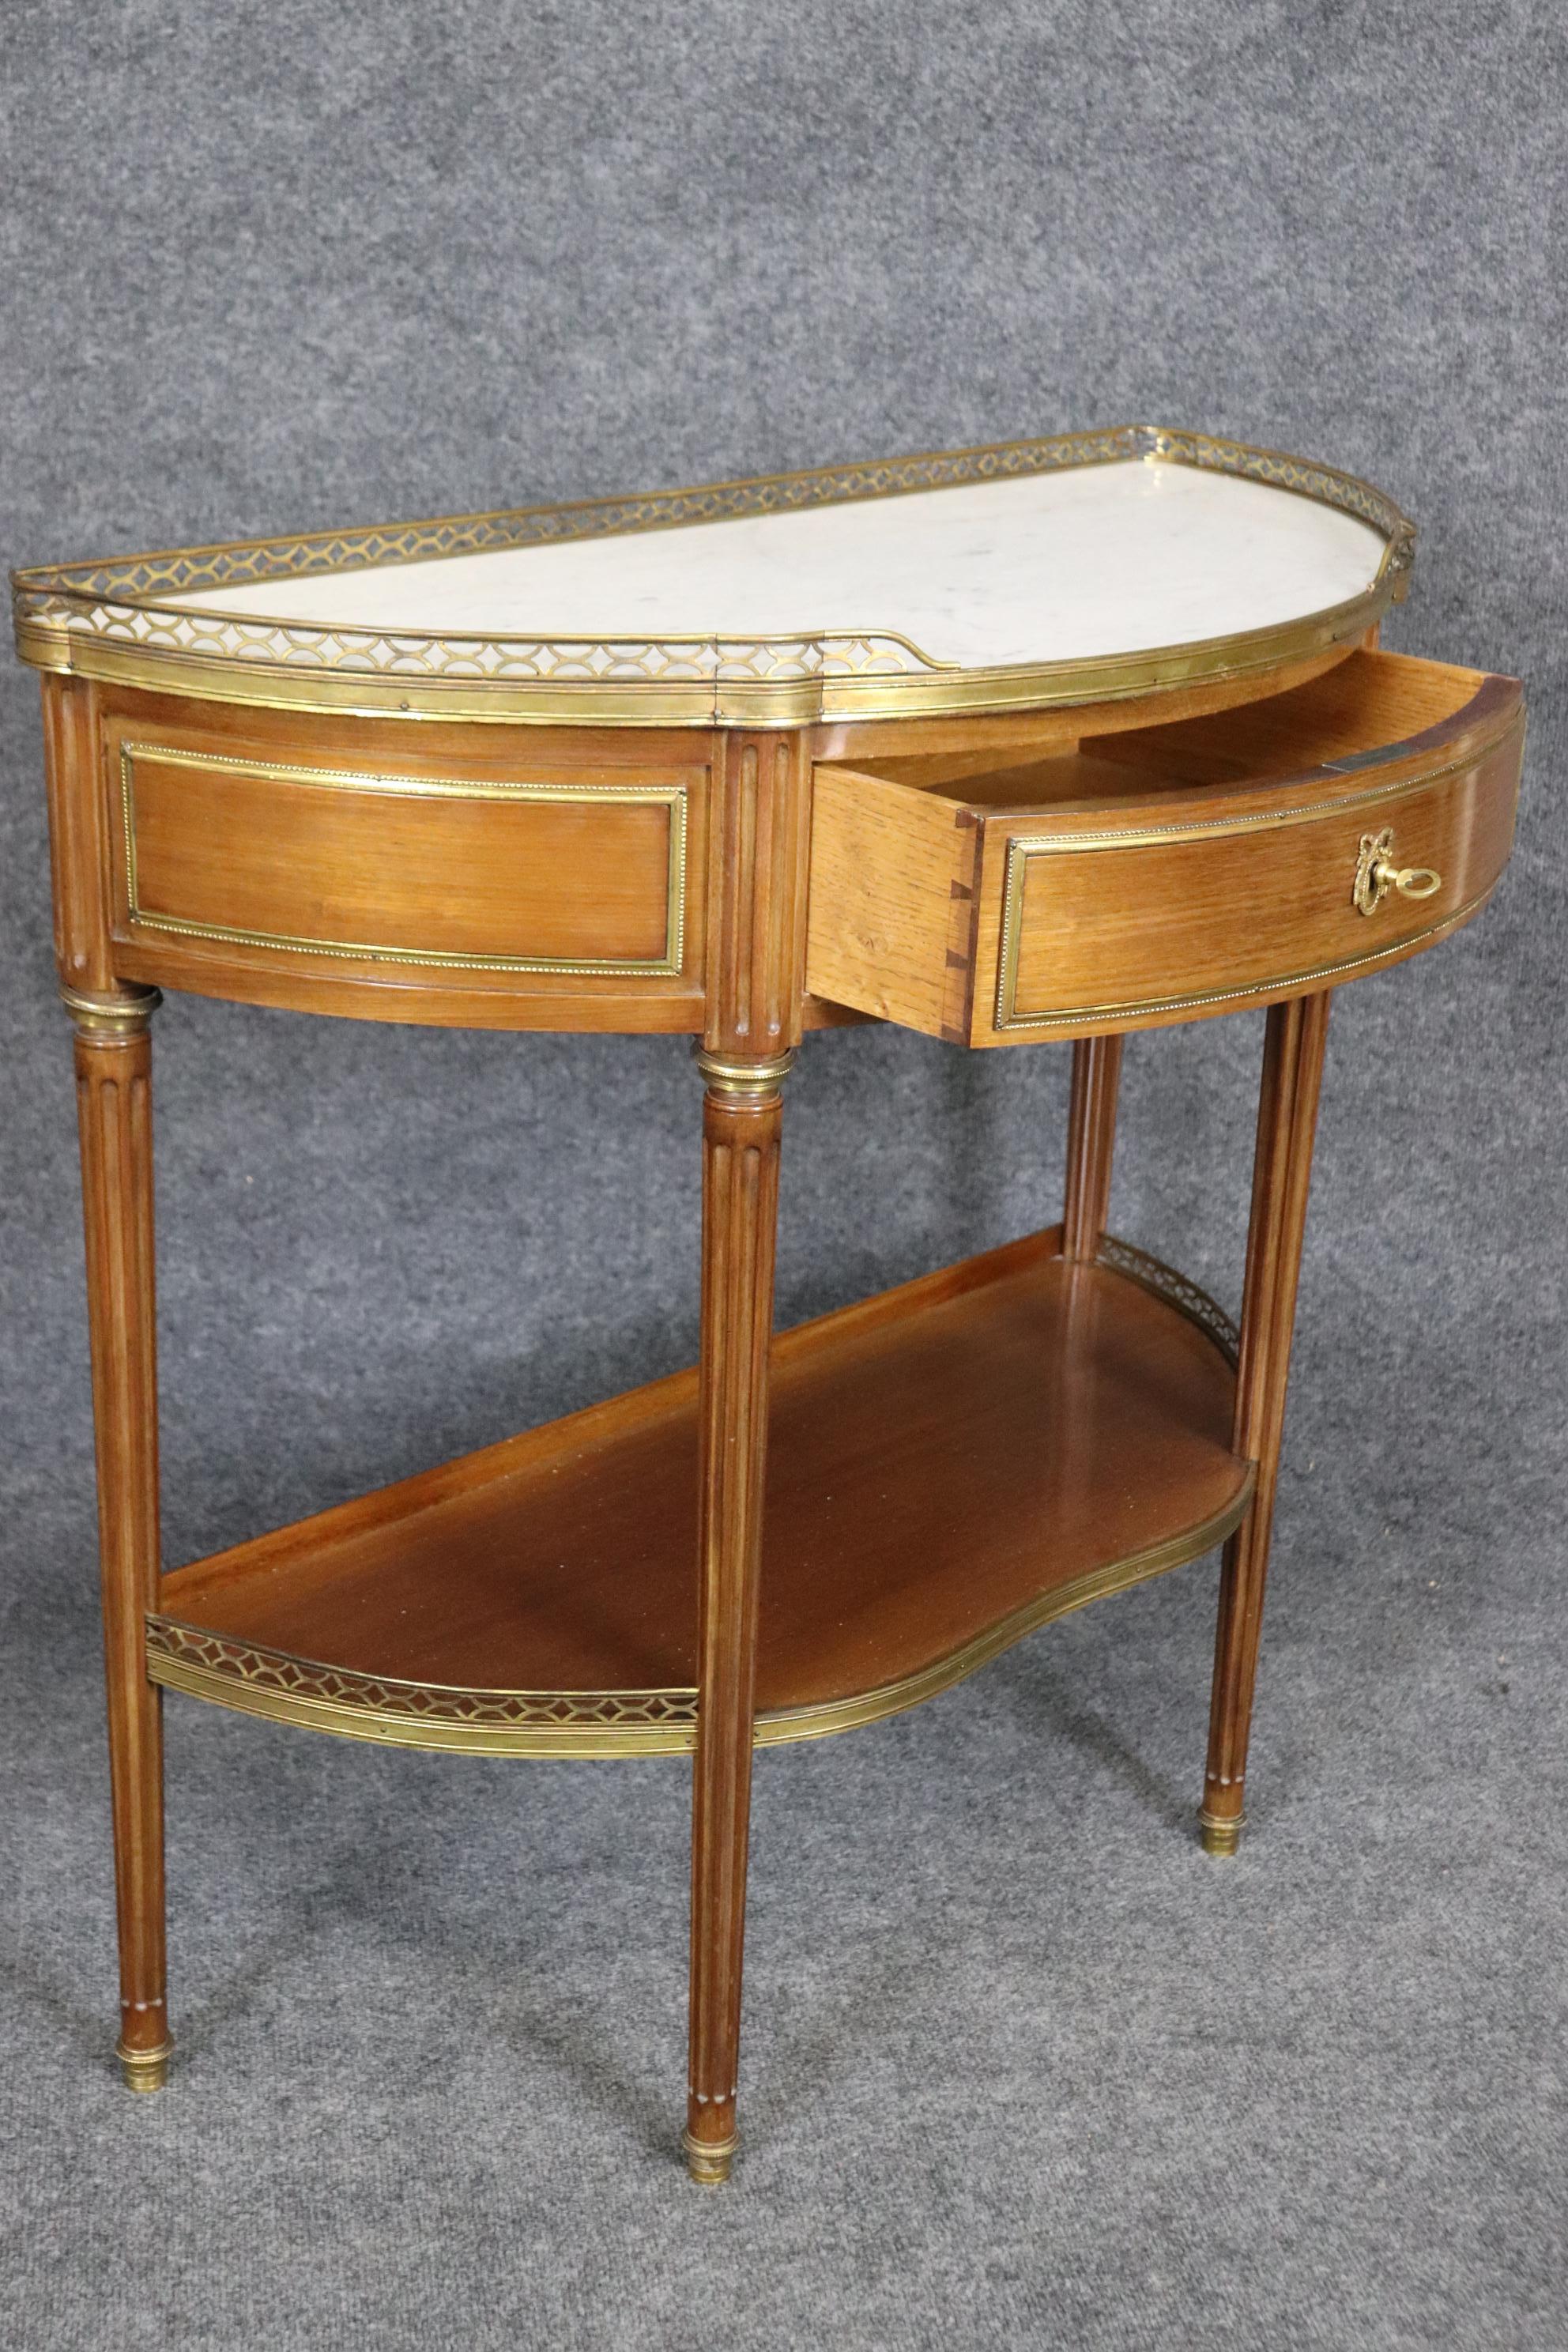 This is a fantastic pair of demilune tables made in France of walnut with groegous brass and bronze ormolu. The tables feature beautiful wood quality and brass and bronze. The tables have white marble tops and are in good condition for their age.